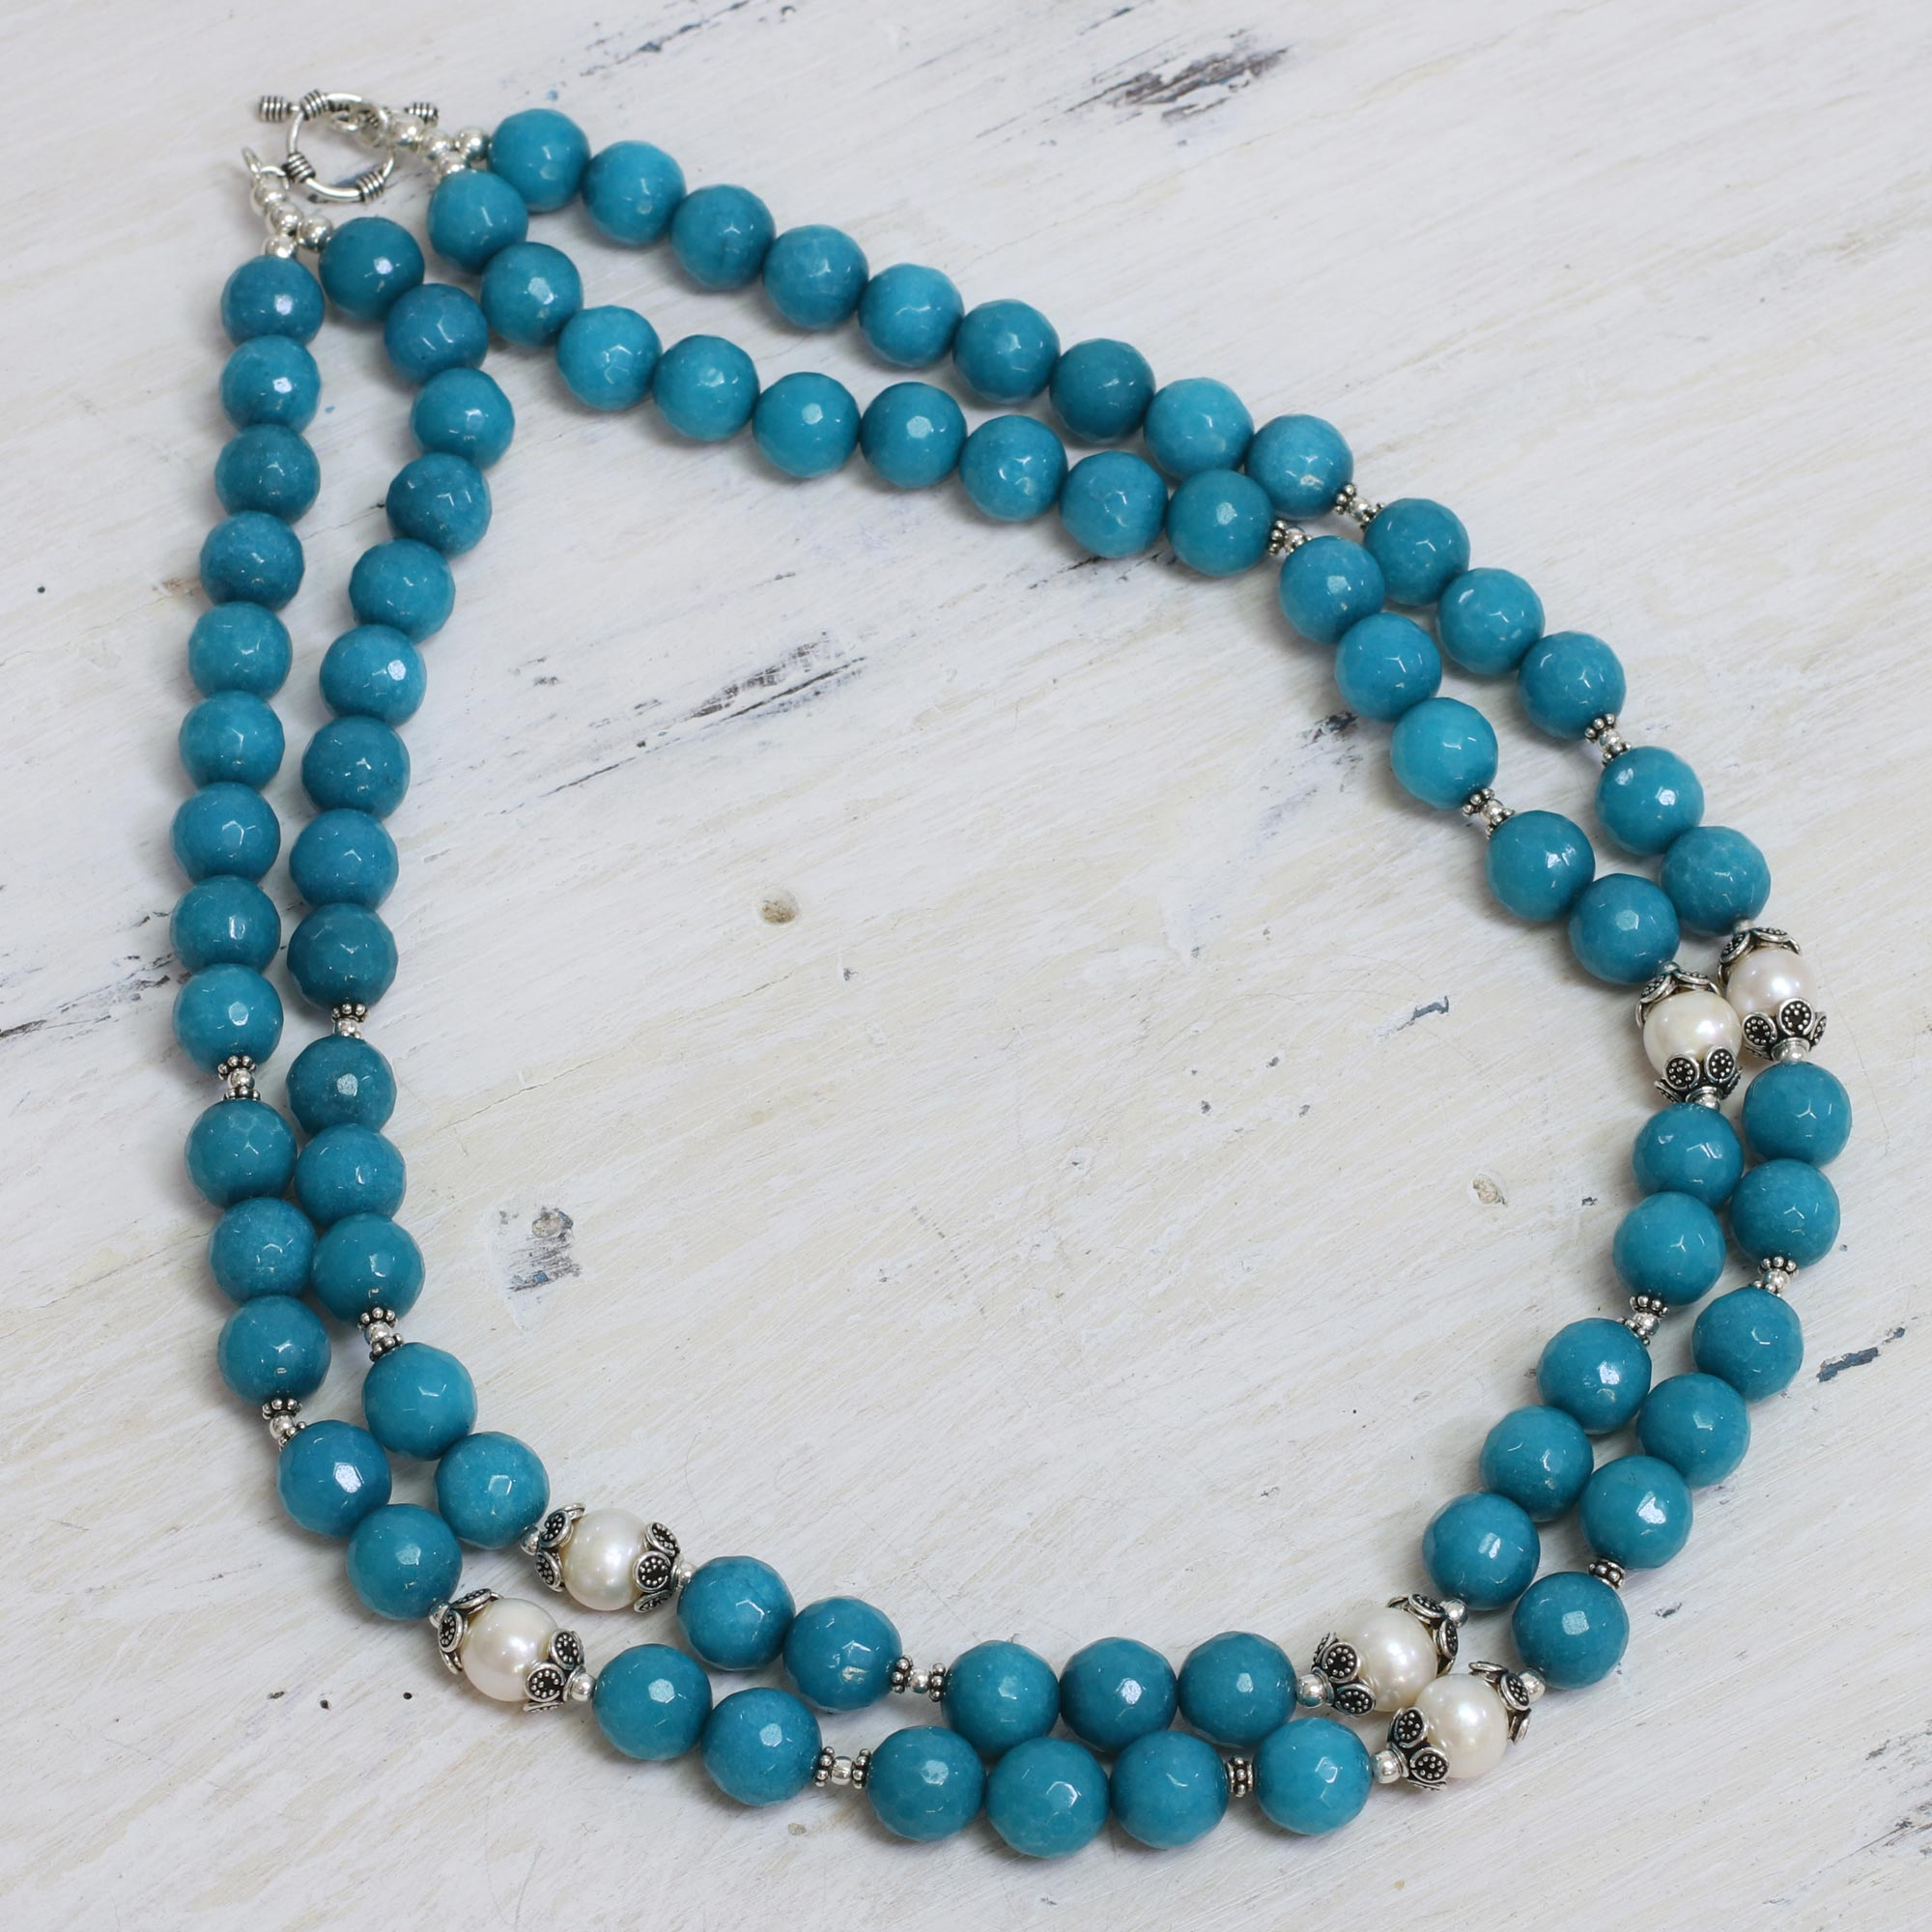 Blue Aventurine and Cultured Pearl Beaded Necklace - Ocean Radiance ...